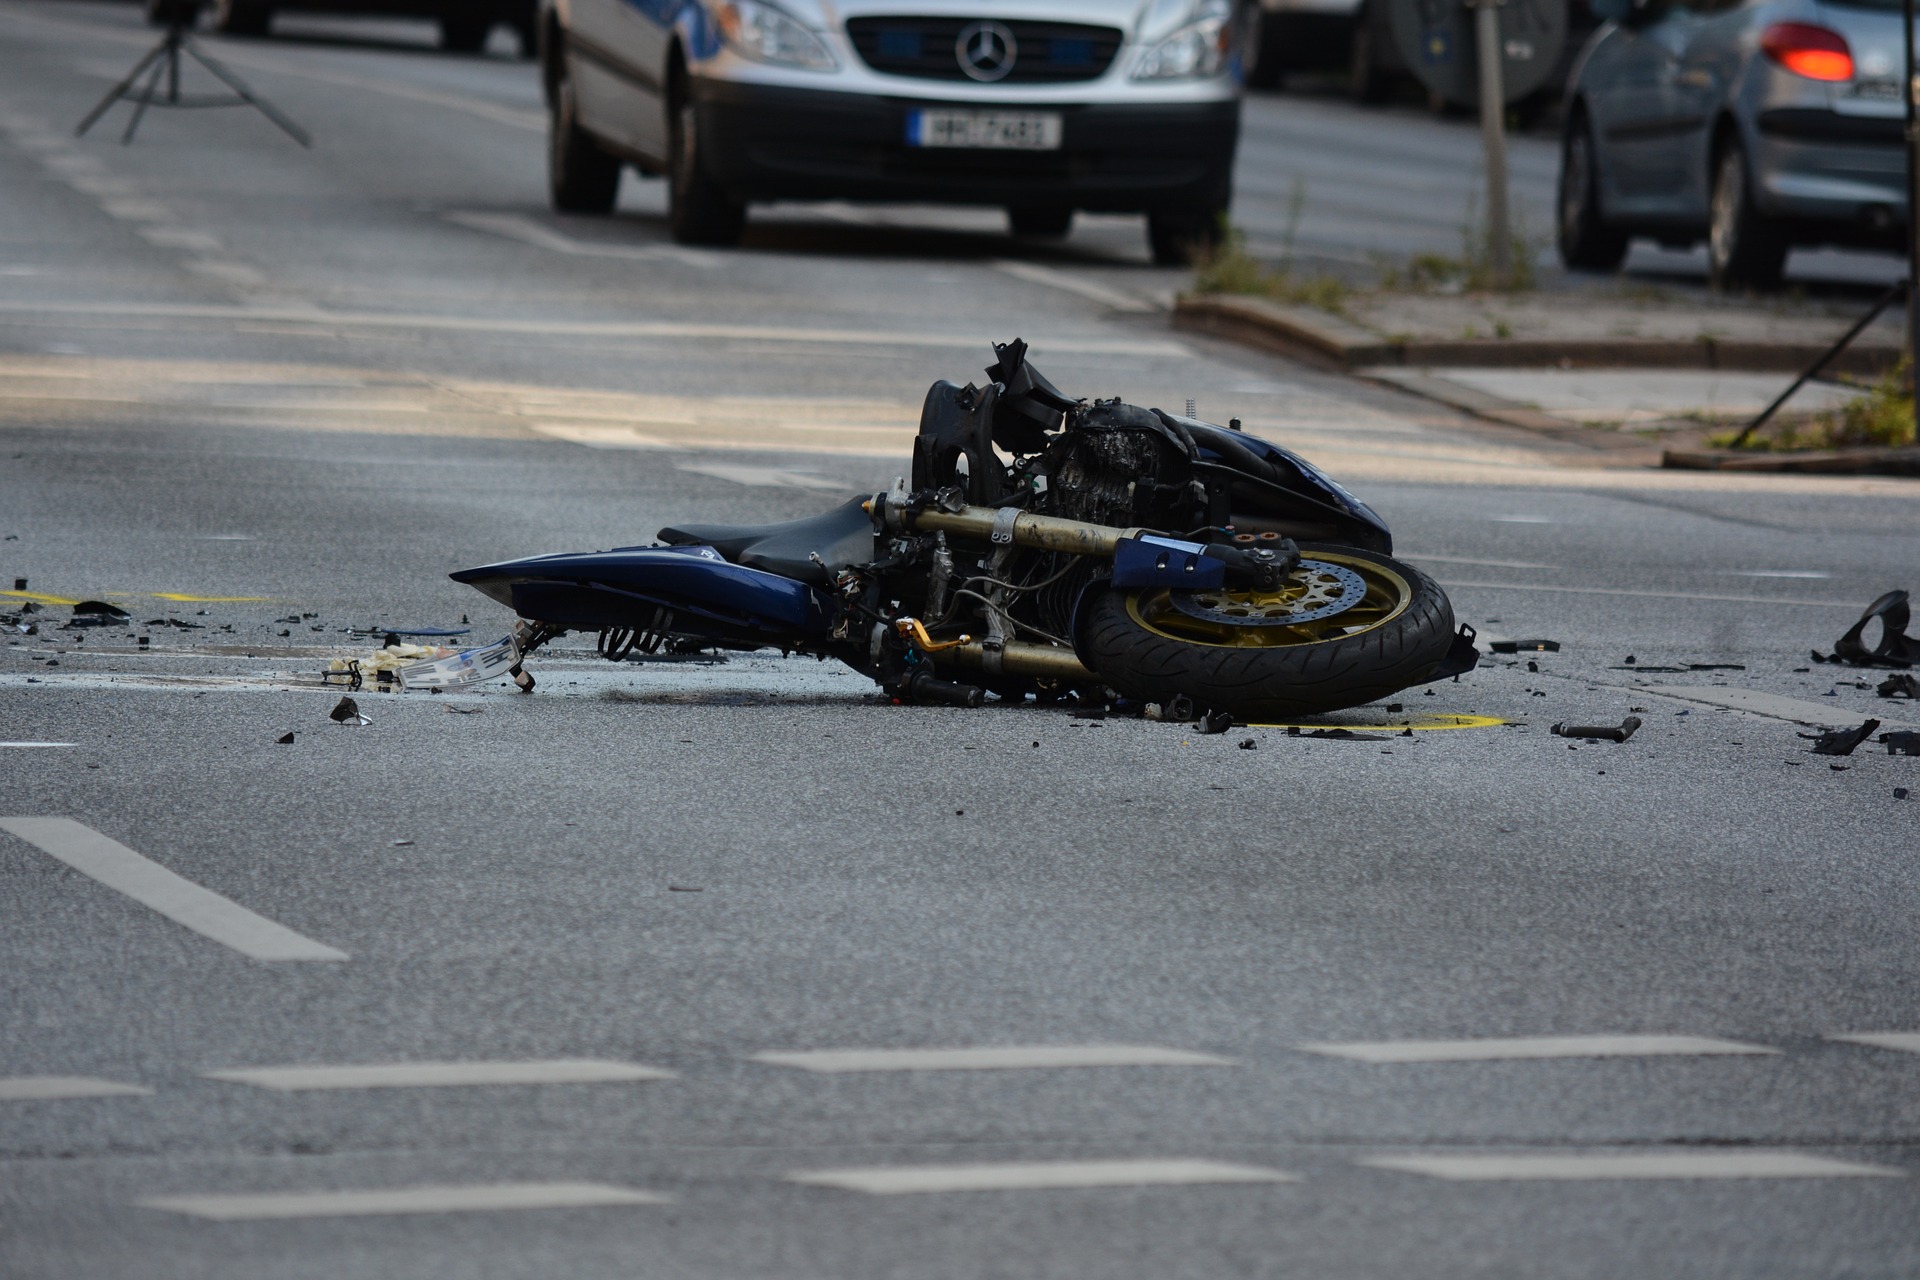 motorcycle Accidents Attorneys